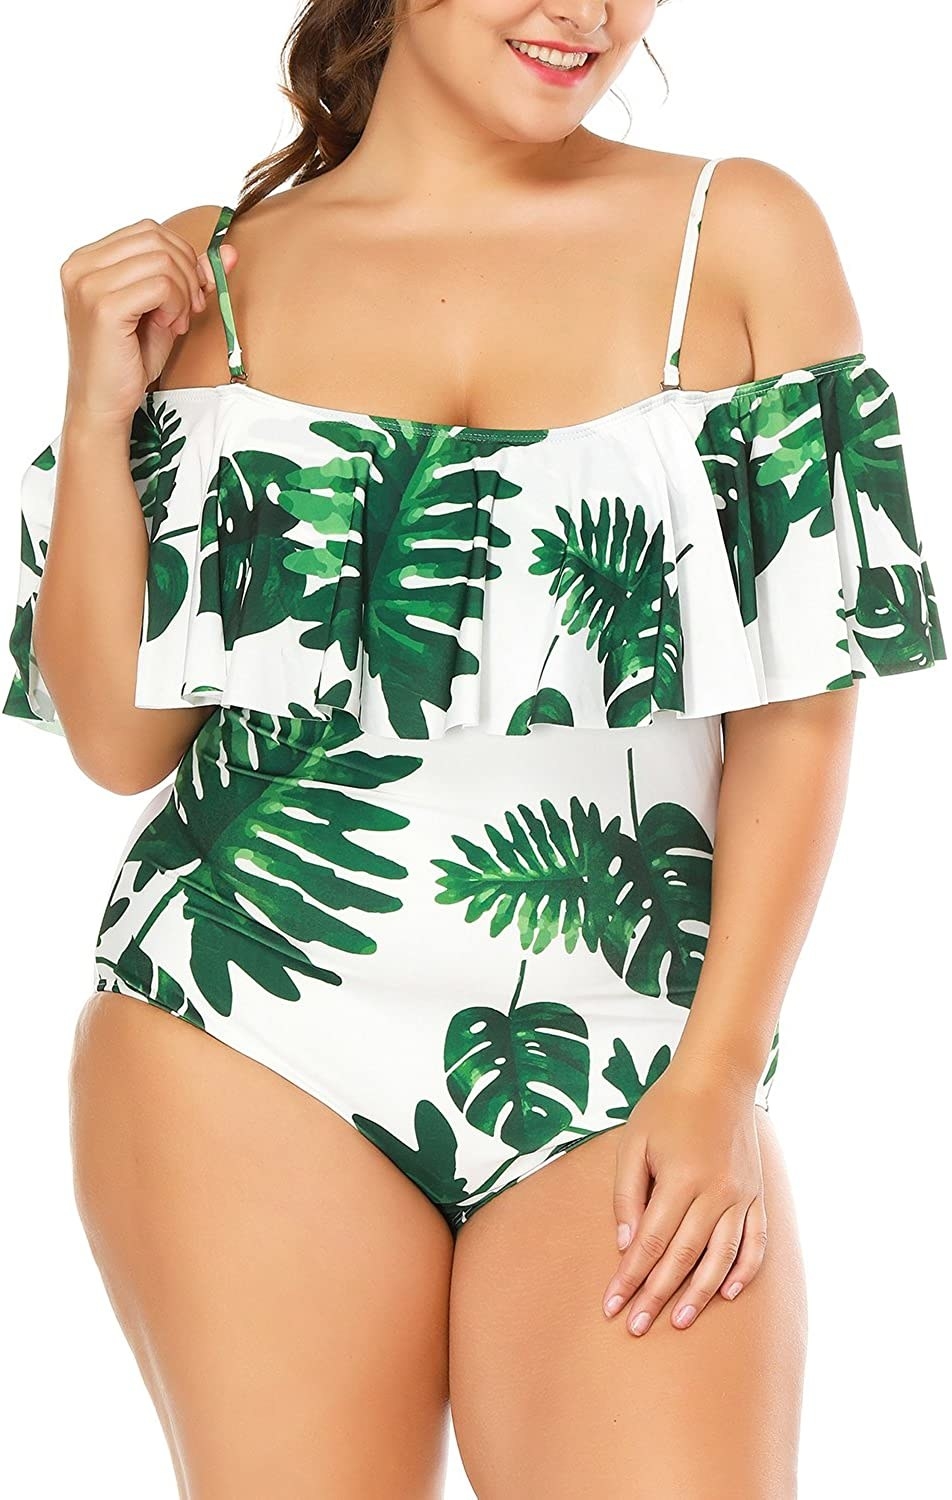 Model wearing the palm tree print swimsuit with ruffles